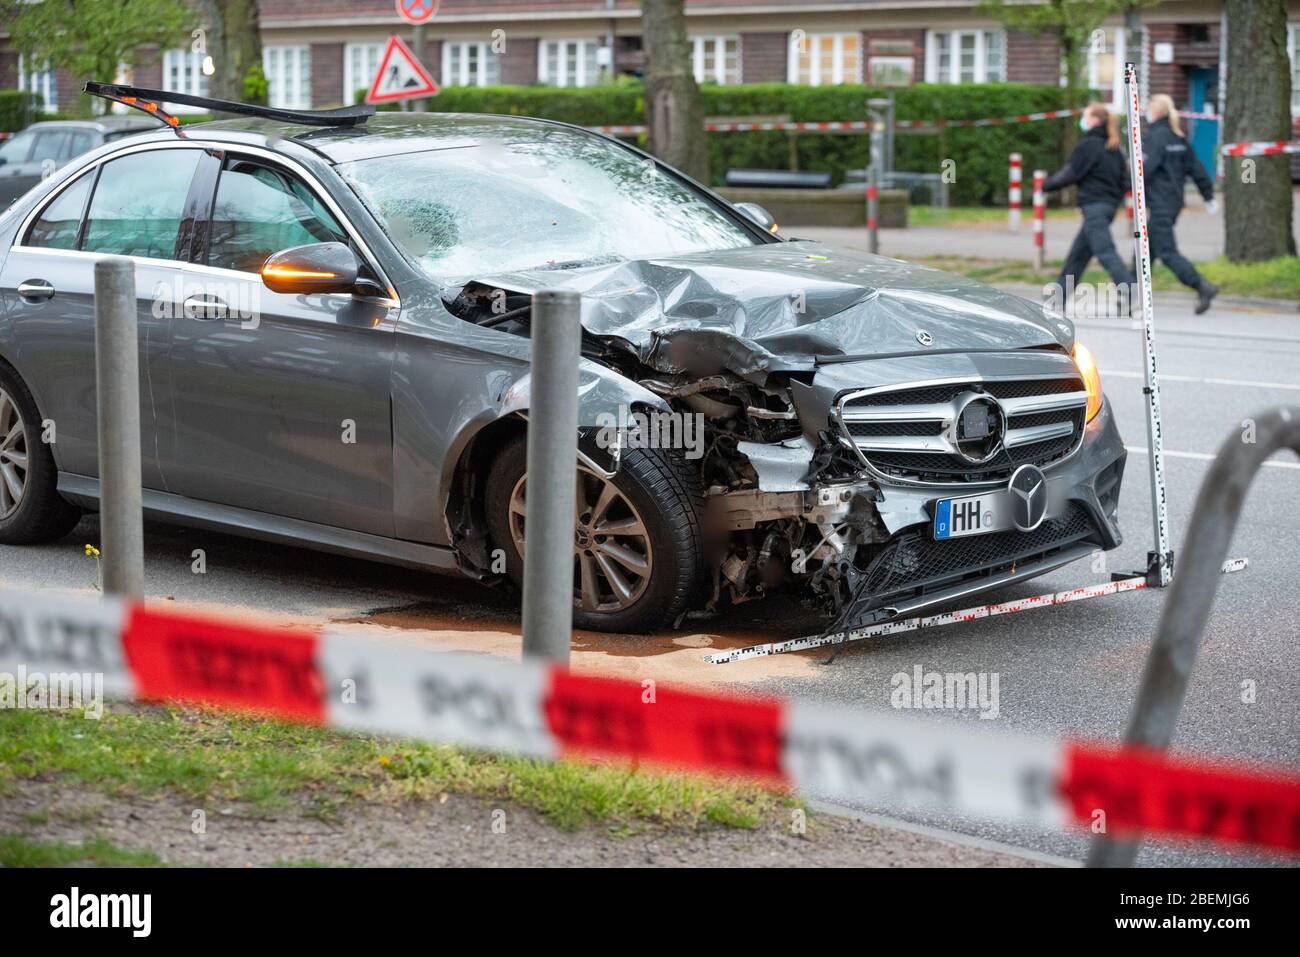 Hamburg, Germany. 14th Apr, 2020. The badly damaged Mercedes stands on the road after the accident. The vehicle had gone off the road in the Altona district, skidded into a traffic light and hit two people. The man and the woman suffered life-threatening injuries. The driver was 'apparently' intoxicated, according to a spokeswoman for the Hamburg Police Situation Center. Credit: Jonas Walzberg/dpa - ATTENTION: The license plate was pixelated for legal reasons/dpa/Alamy Live News Stock Photo